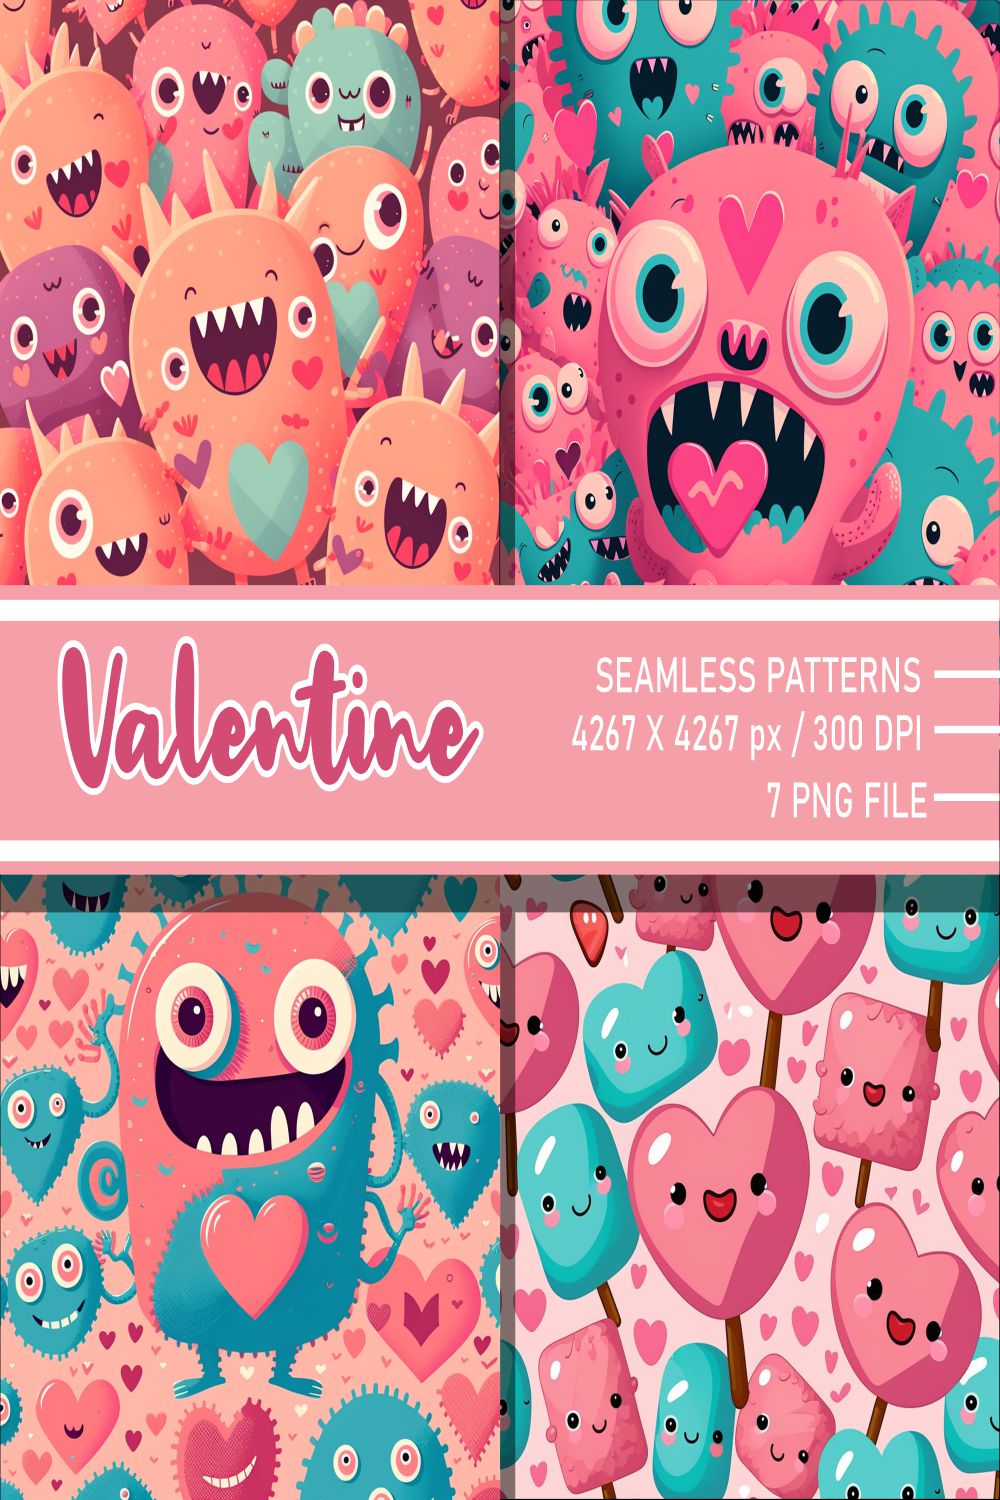 happy valentines day character 2$ pinterest preview image.